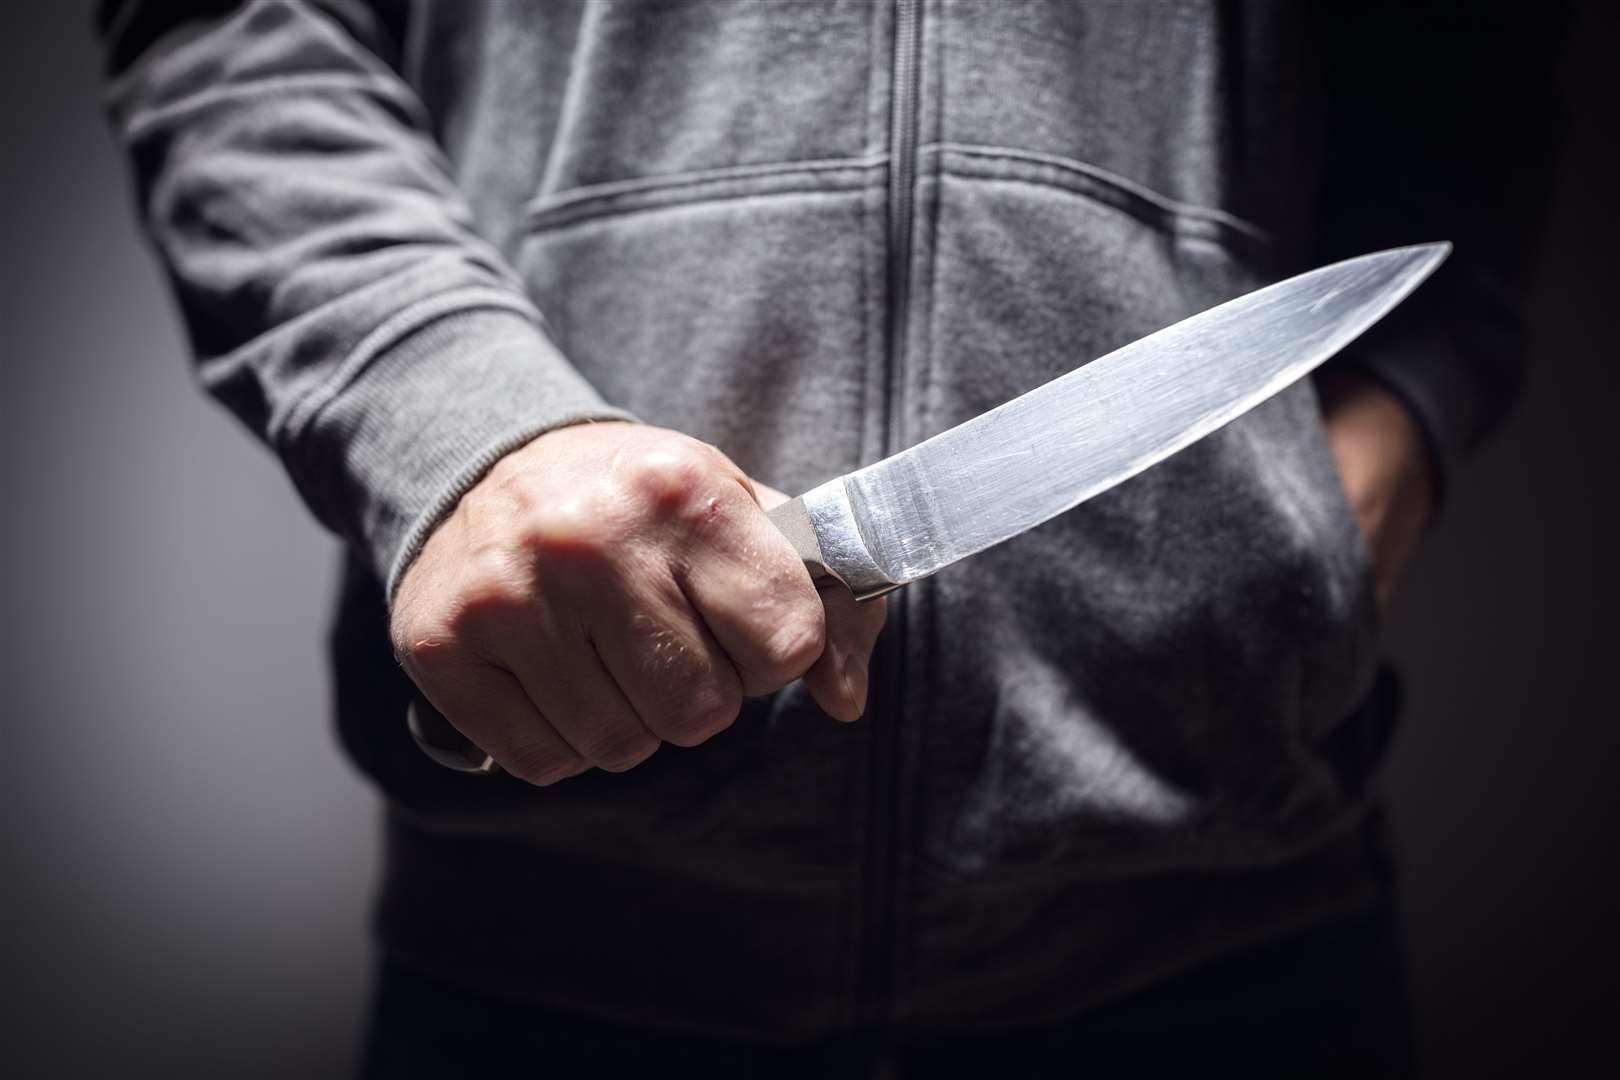 A teenager was arrested on suspicion of affray and carrying a knife